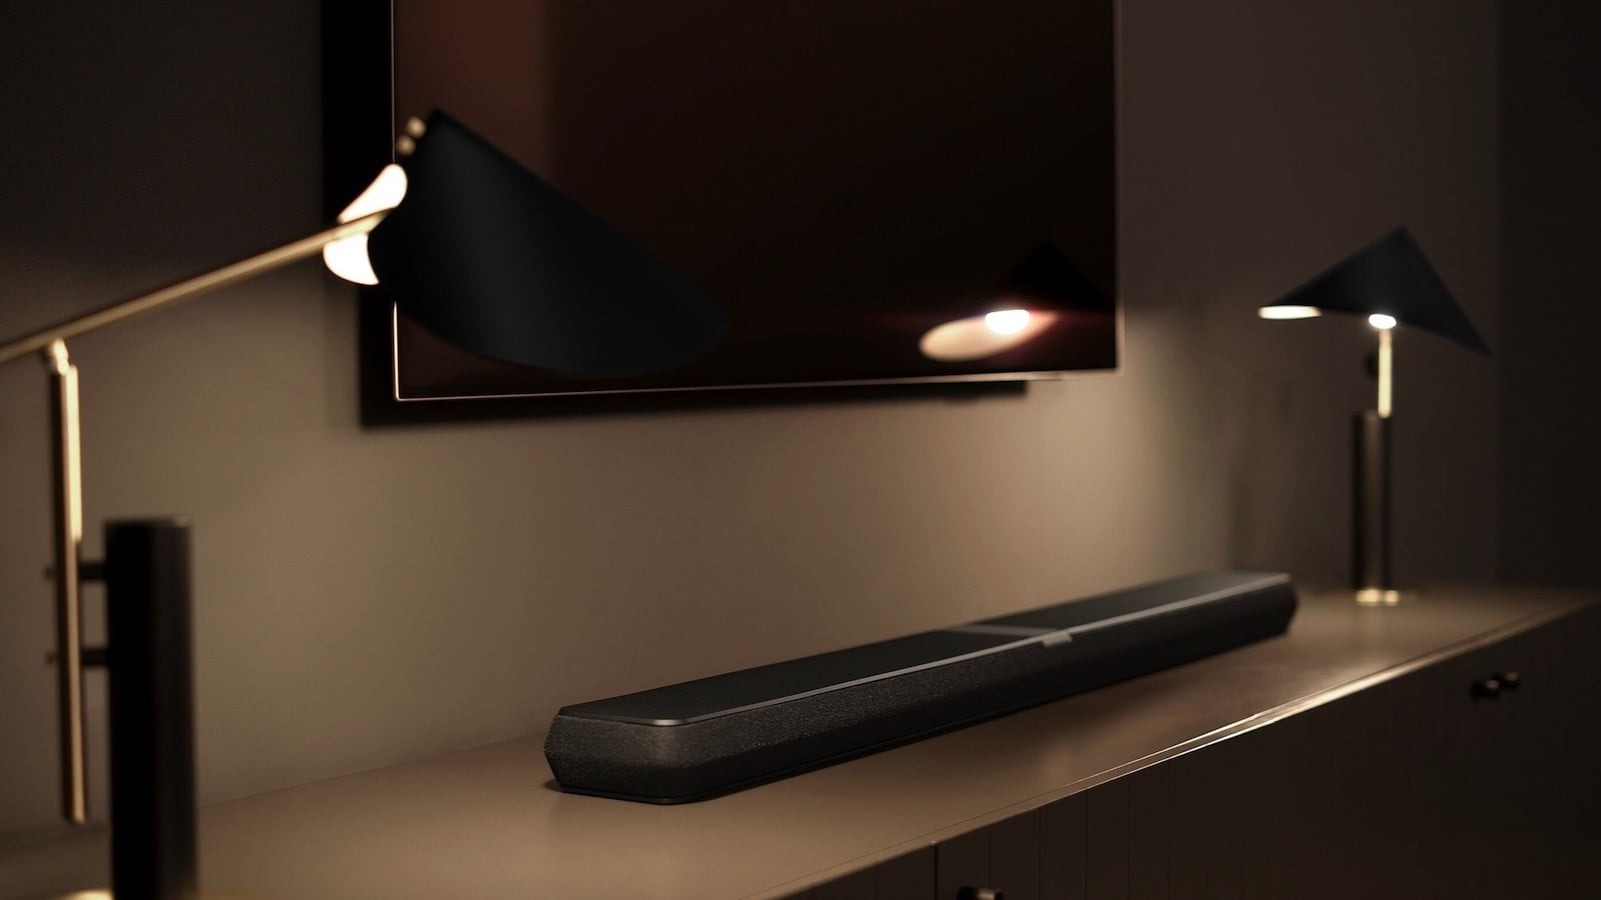 Bowers & Wilkins Panorama 3 soundbar will blow you away with Dolby Atmos, 13 drivers, and more